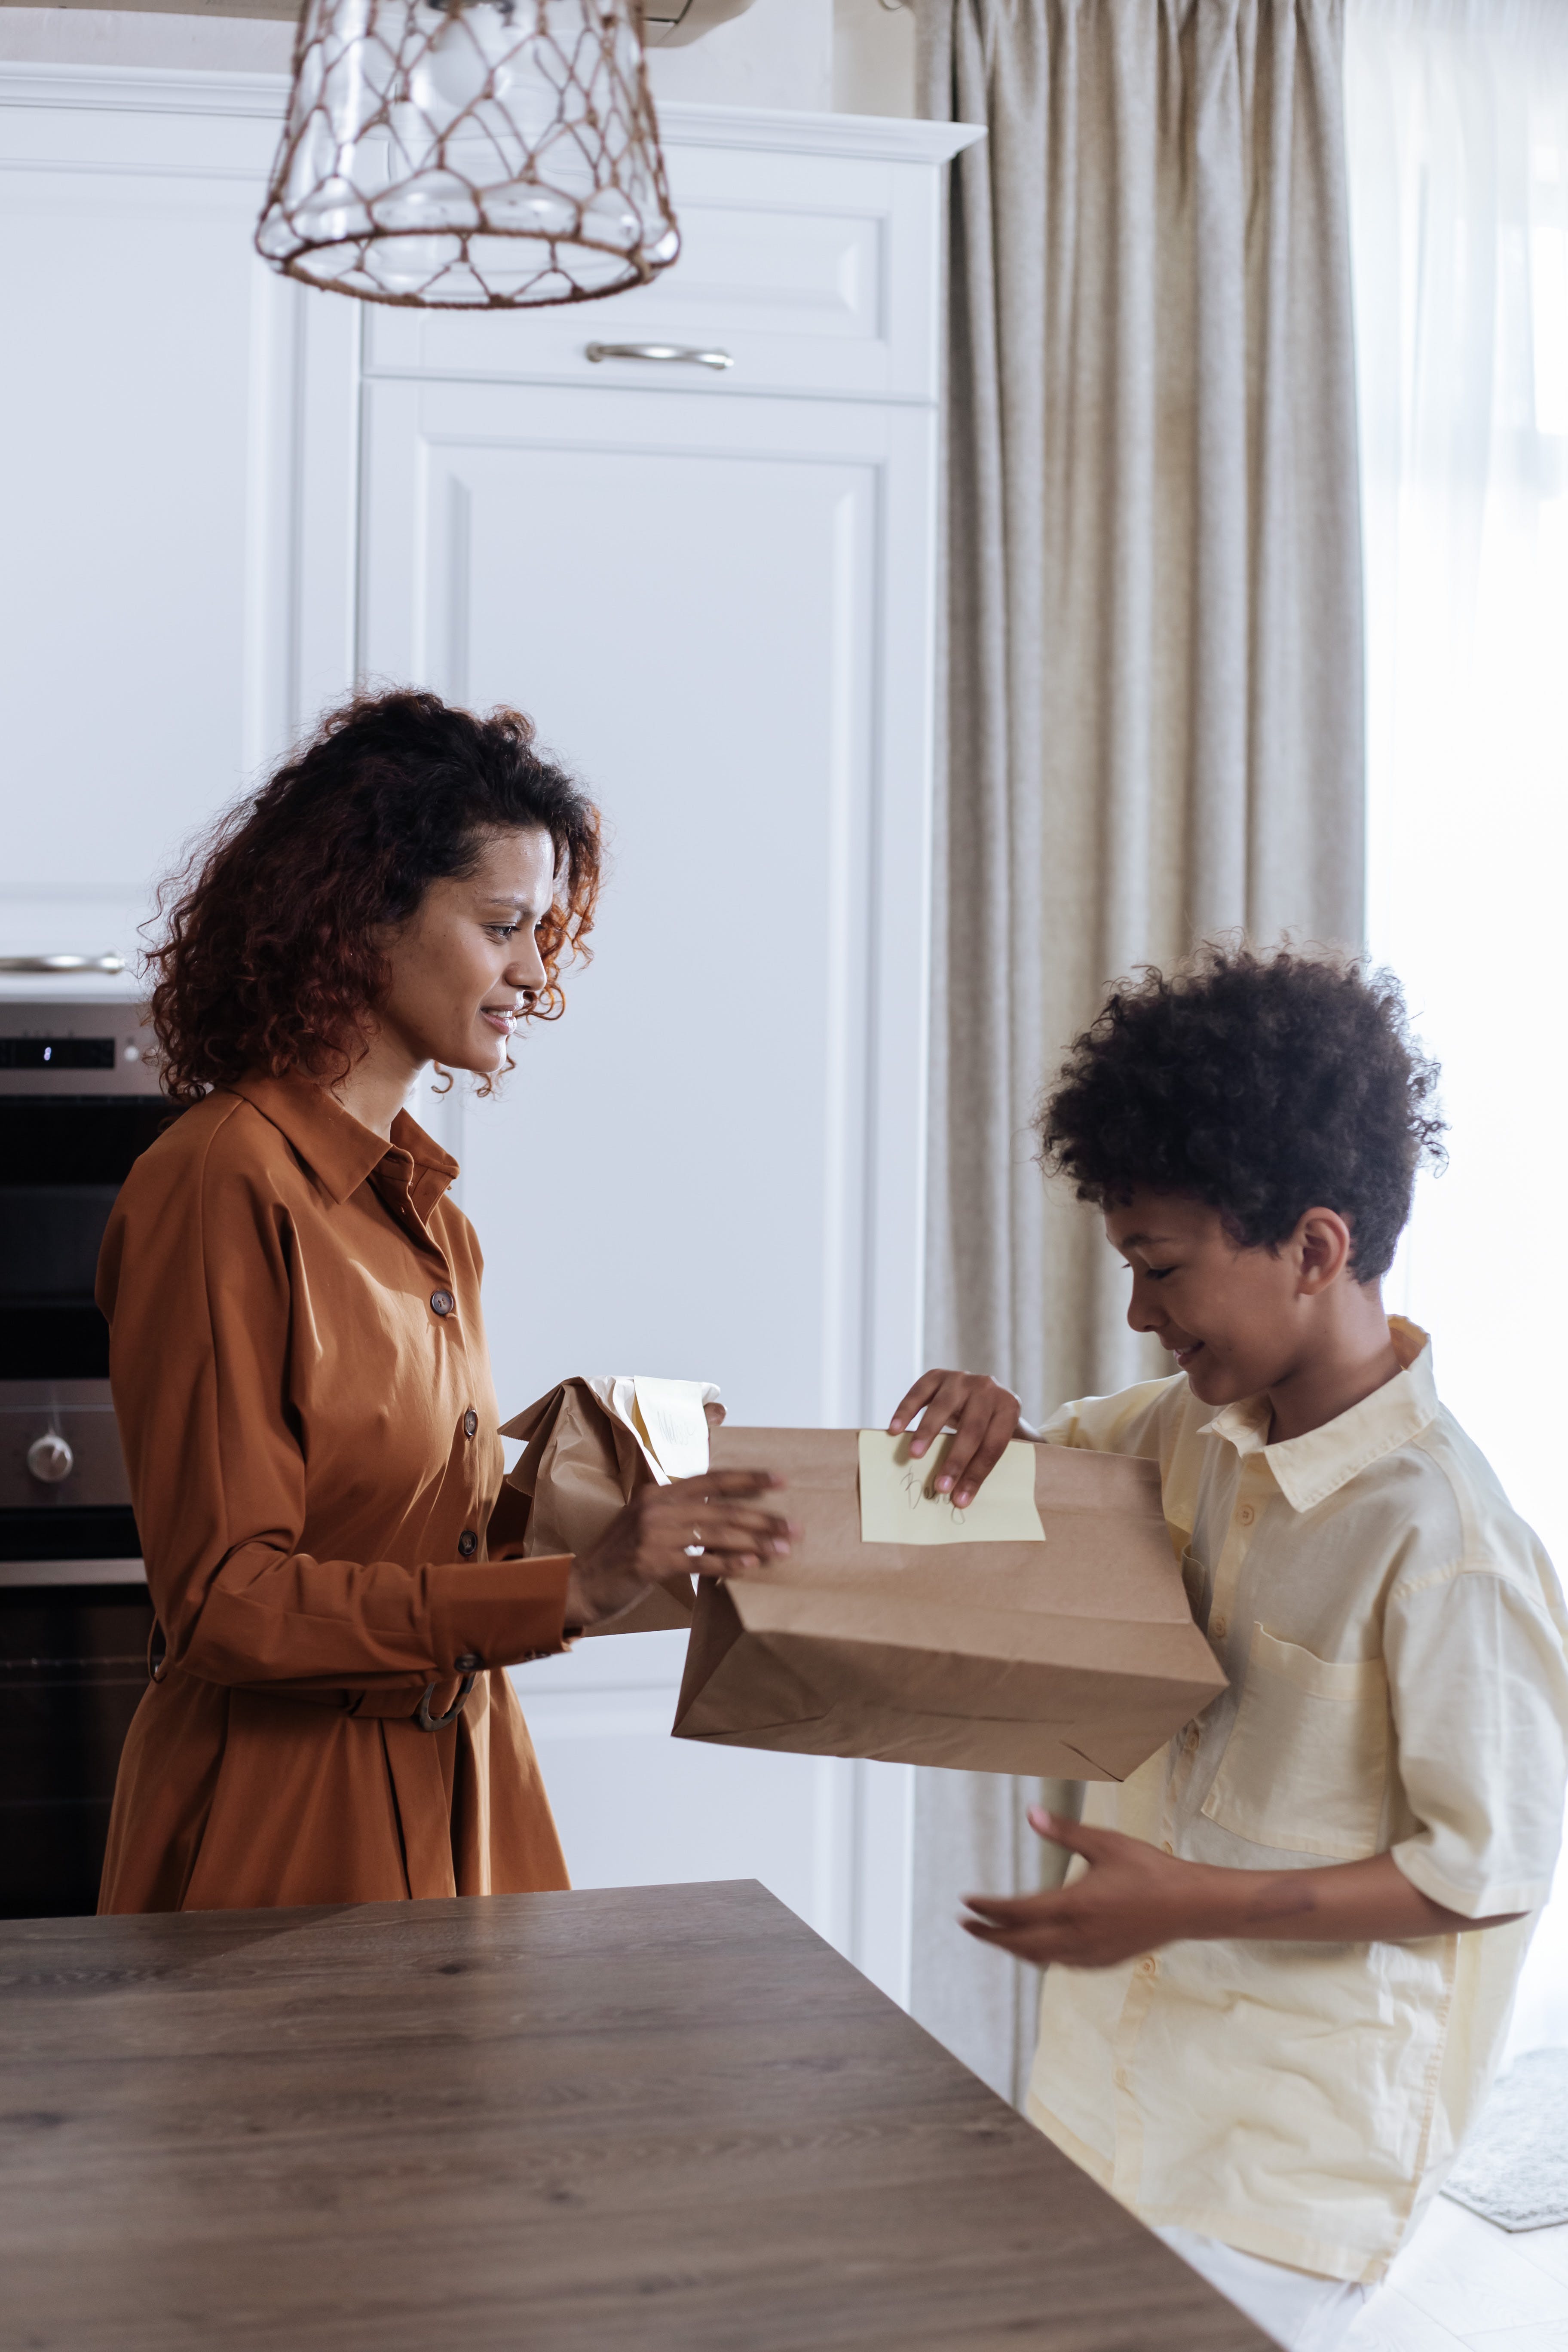 A mom giving her son a lunch bag | Source: Pexels